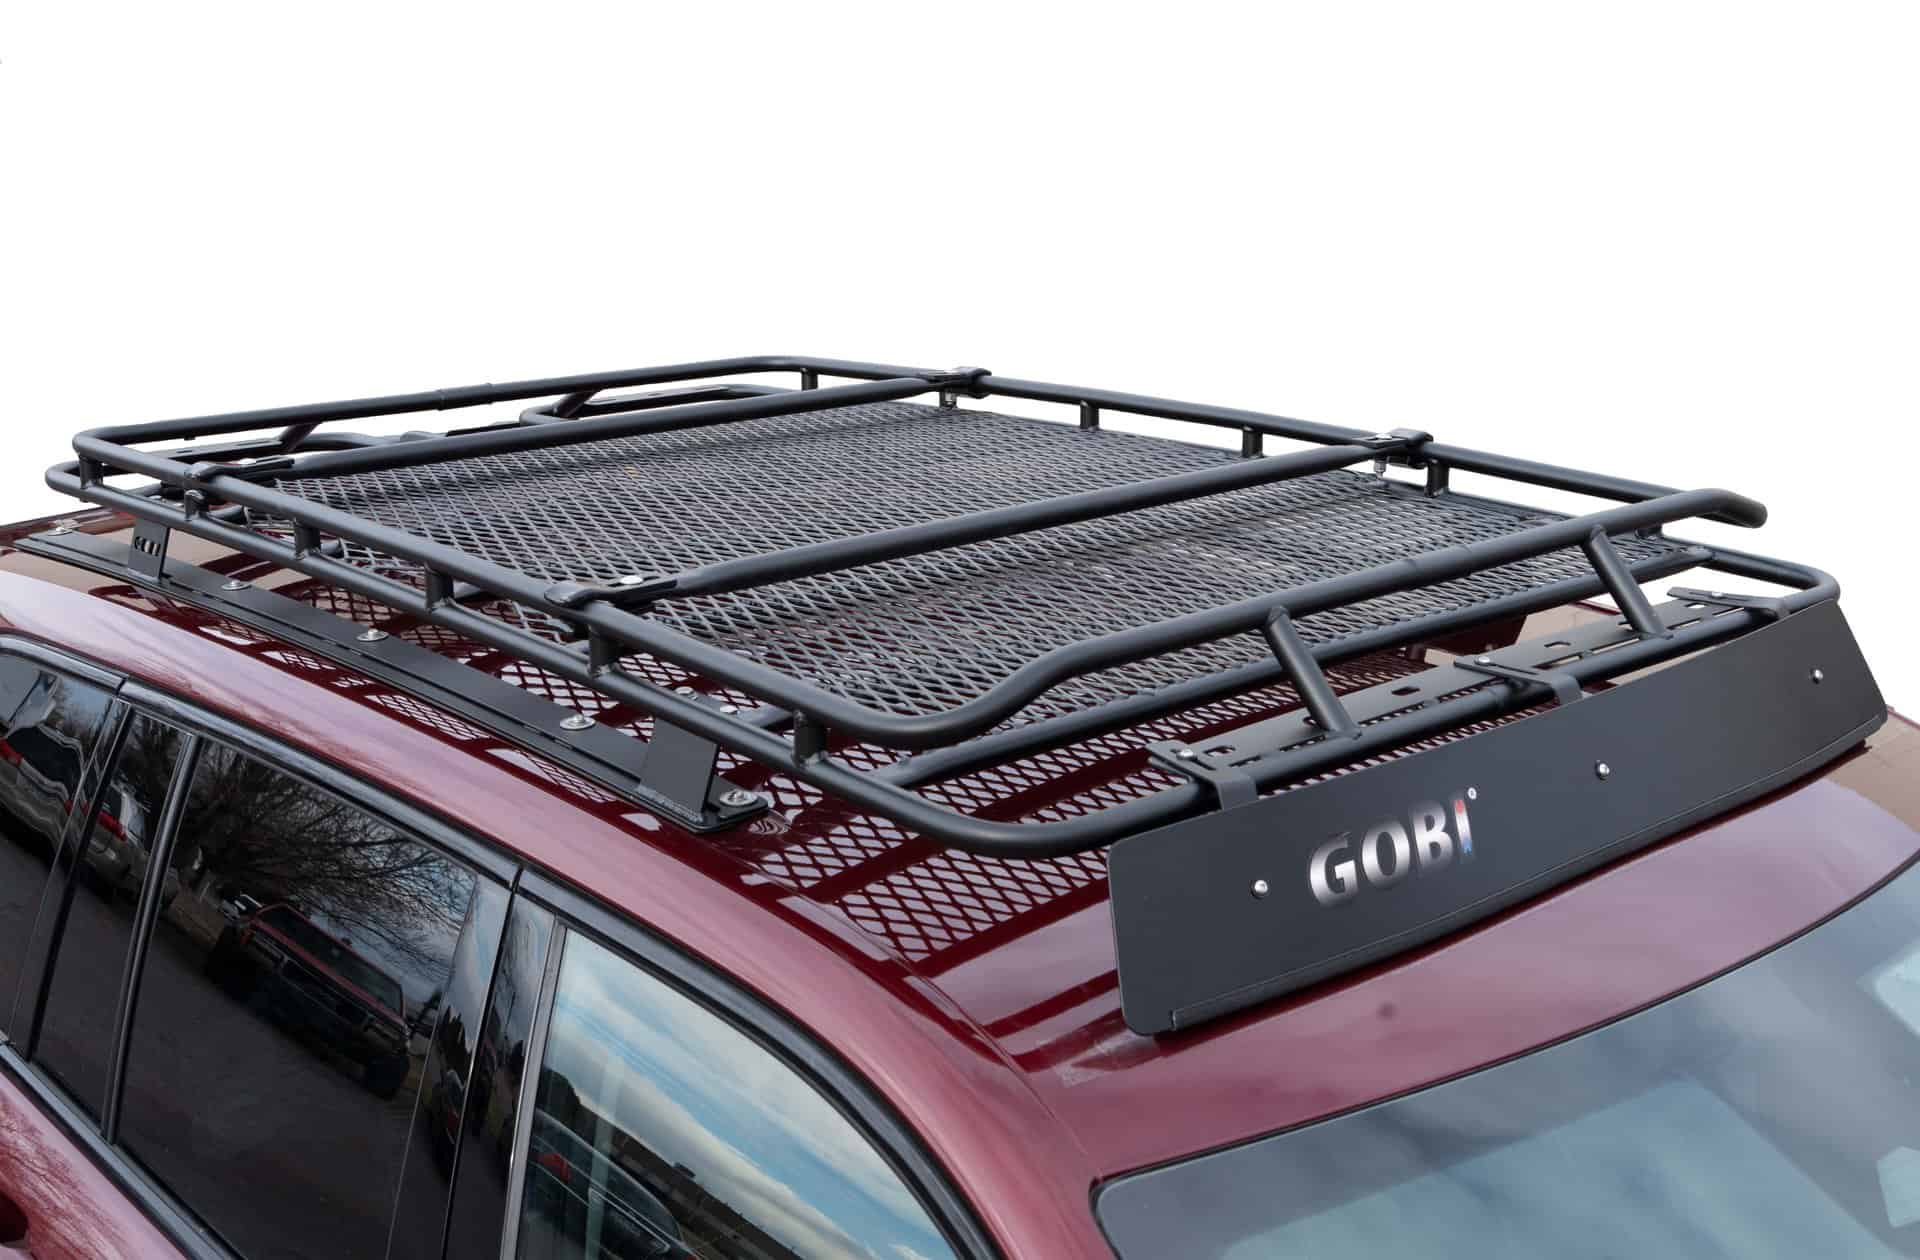 Grandcherokeel 2 row top of <b>jeep grand cherokee 4xe<br></b> low-profile roof rack<font color ="dodgerblue"><br>multi light no sunroof - stealth</font>